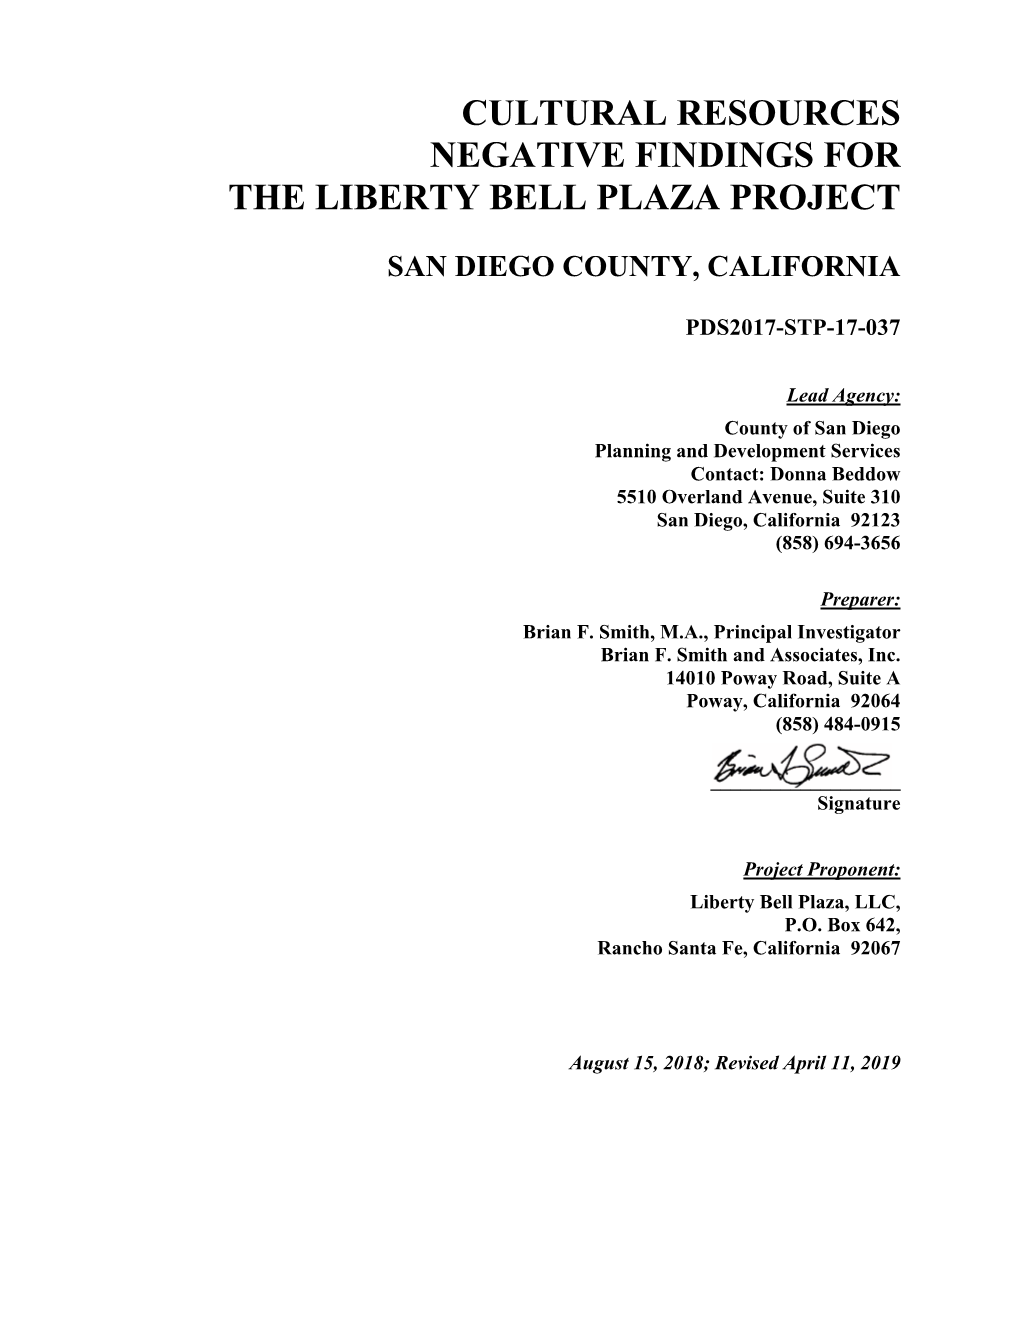 Cultural Resources Negative Findings for the Liberty Bell Plaza Project